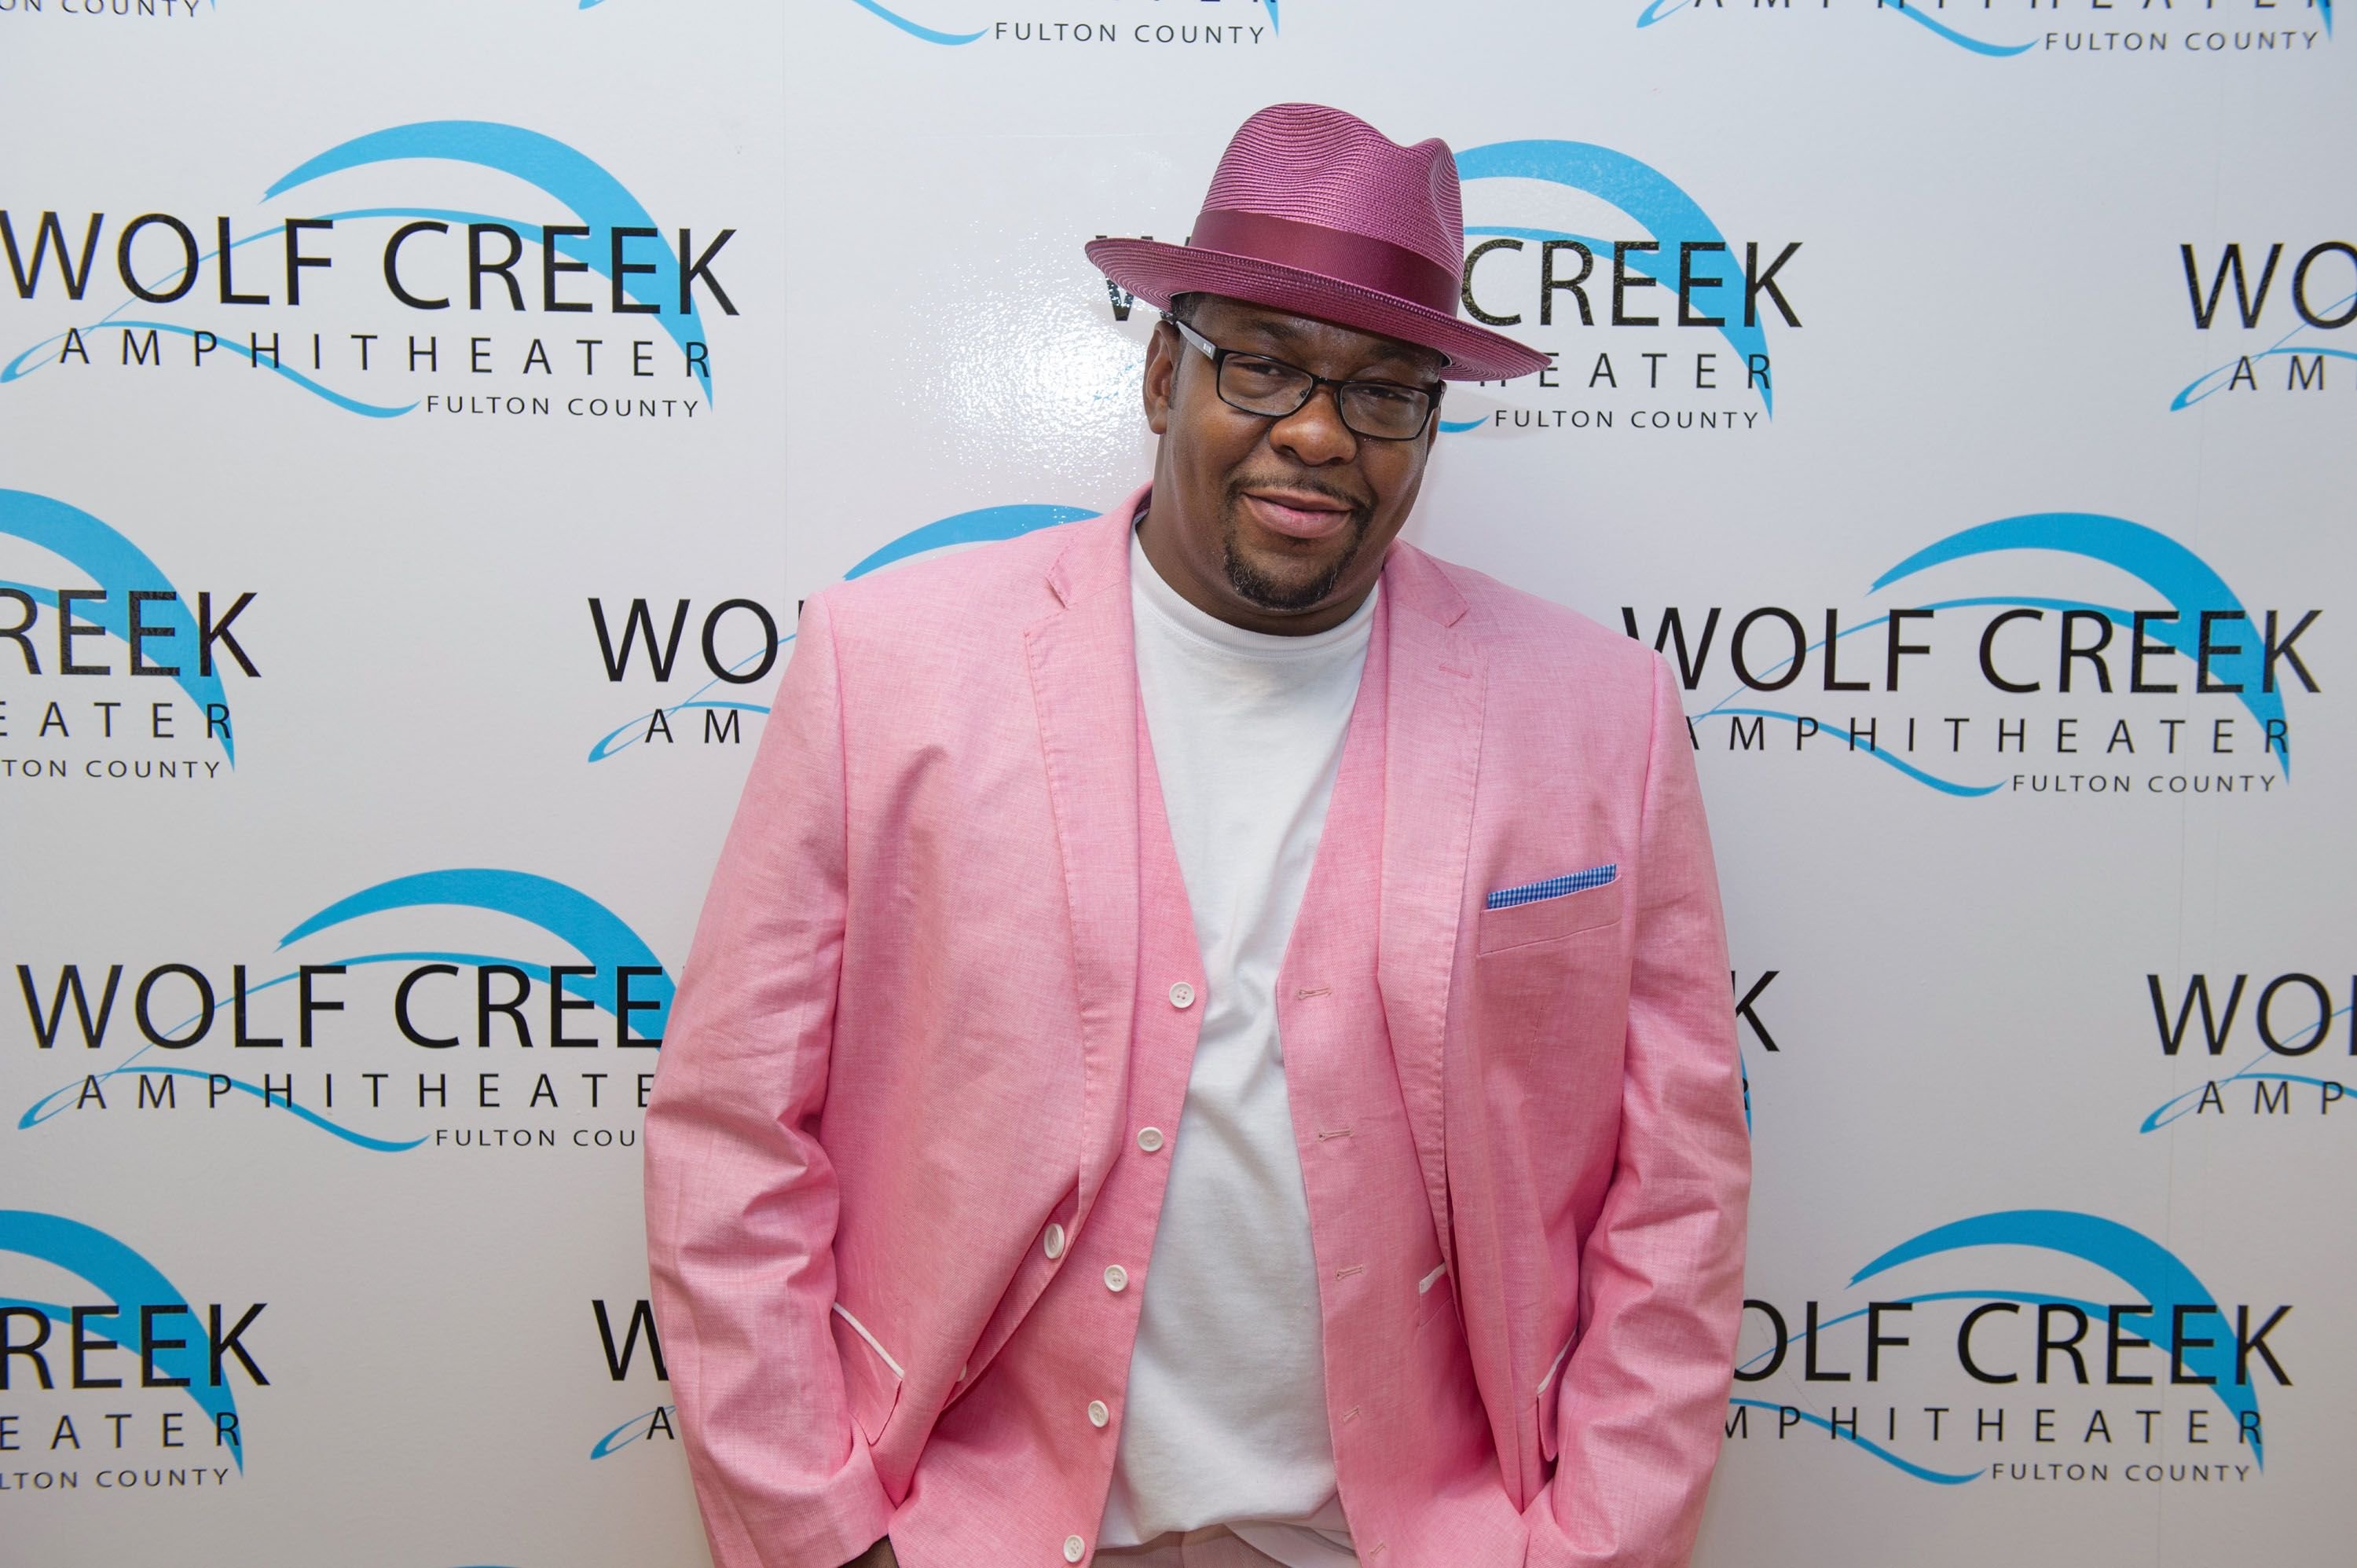 Bobby Brown at the Affordable Old School Concert Series featuring Bobby Brown, Mint Condition, Juvenile, 8 Ball & MLG, Tweet And J.J. Williamson at Wolf Creek Amphitheater on July 4, 2015 | Photo: Getty Images